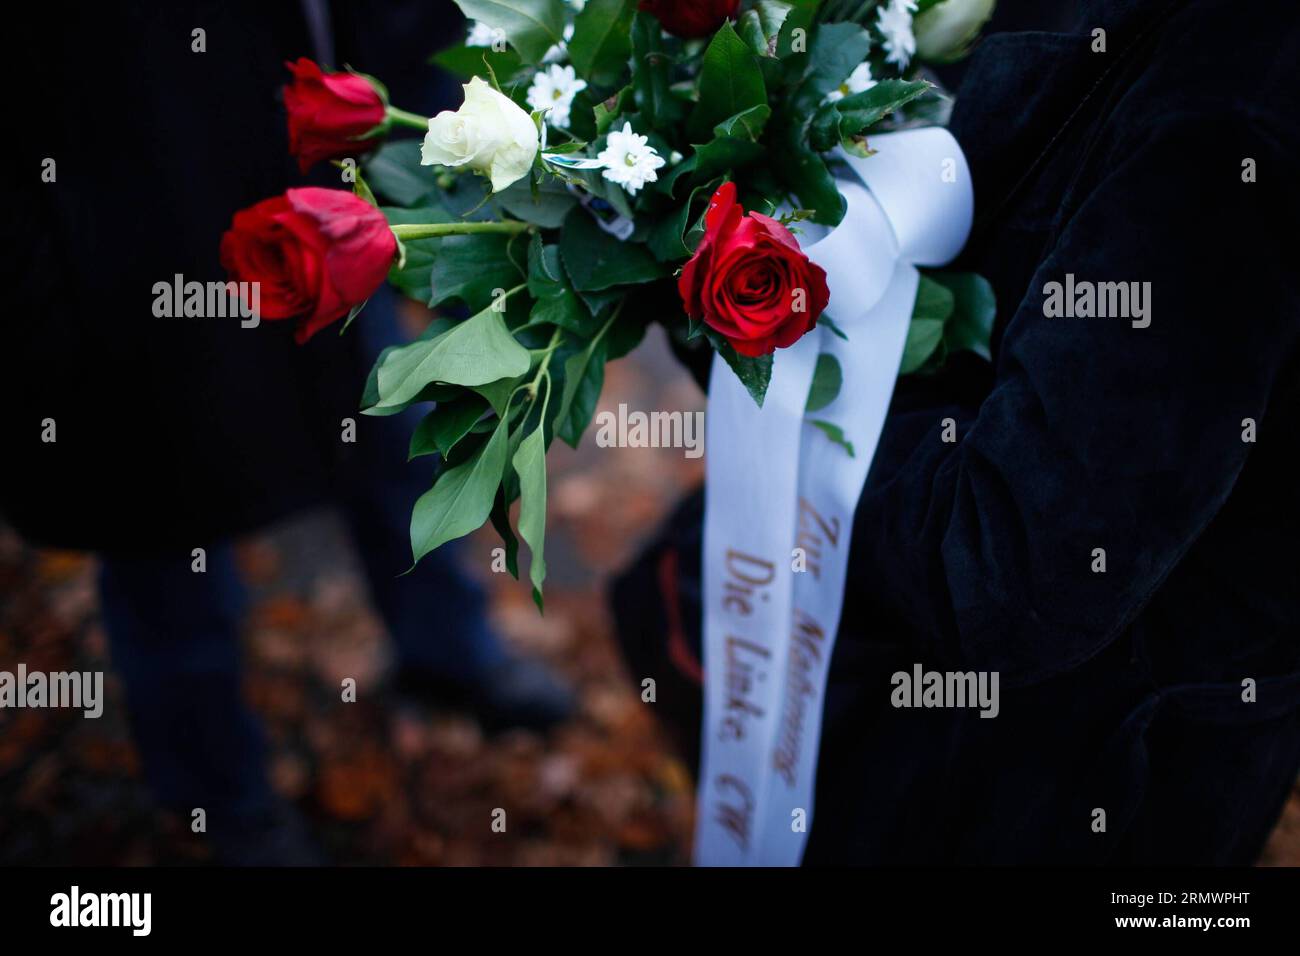 AKTUELLES ZEITGESCHEHEN Gedenken an die Reichspogromnacht von 1938 (141108) -- BERLIN,   People holding flowers gather near Berlin s Grunewald train station to attend a memorial activity for the Crystal Night in Berlin, Germany, on Nov. 7, 2014. Some 100 middle school students and students from the local police school took part in the memorial activity on Friday to commemorate the 76th anniversary of the Nazi s Kristallnacht (Crystal Night, Night of Broken Glass) in 1938, at Berlin s Grunewald train station, one of the major sites of deportation of the Berlin Jews during World War II. )(azp) G Stock Photo